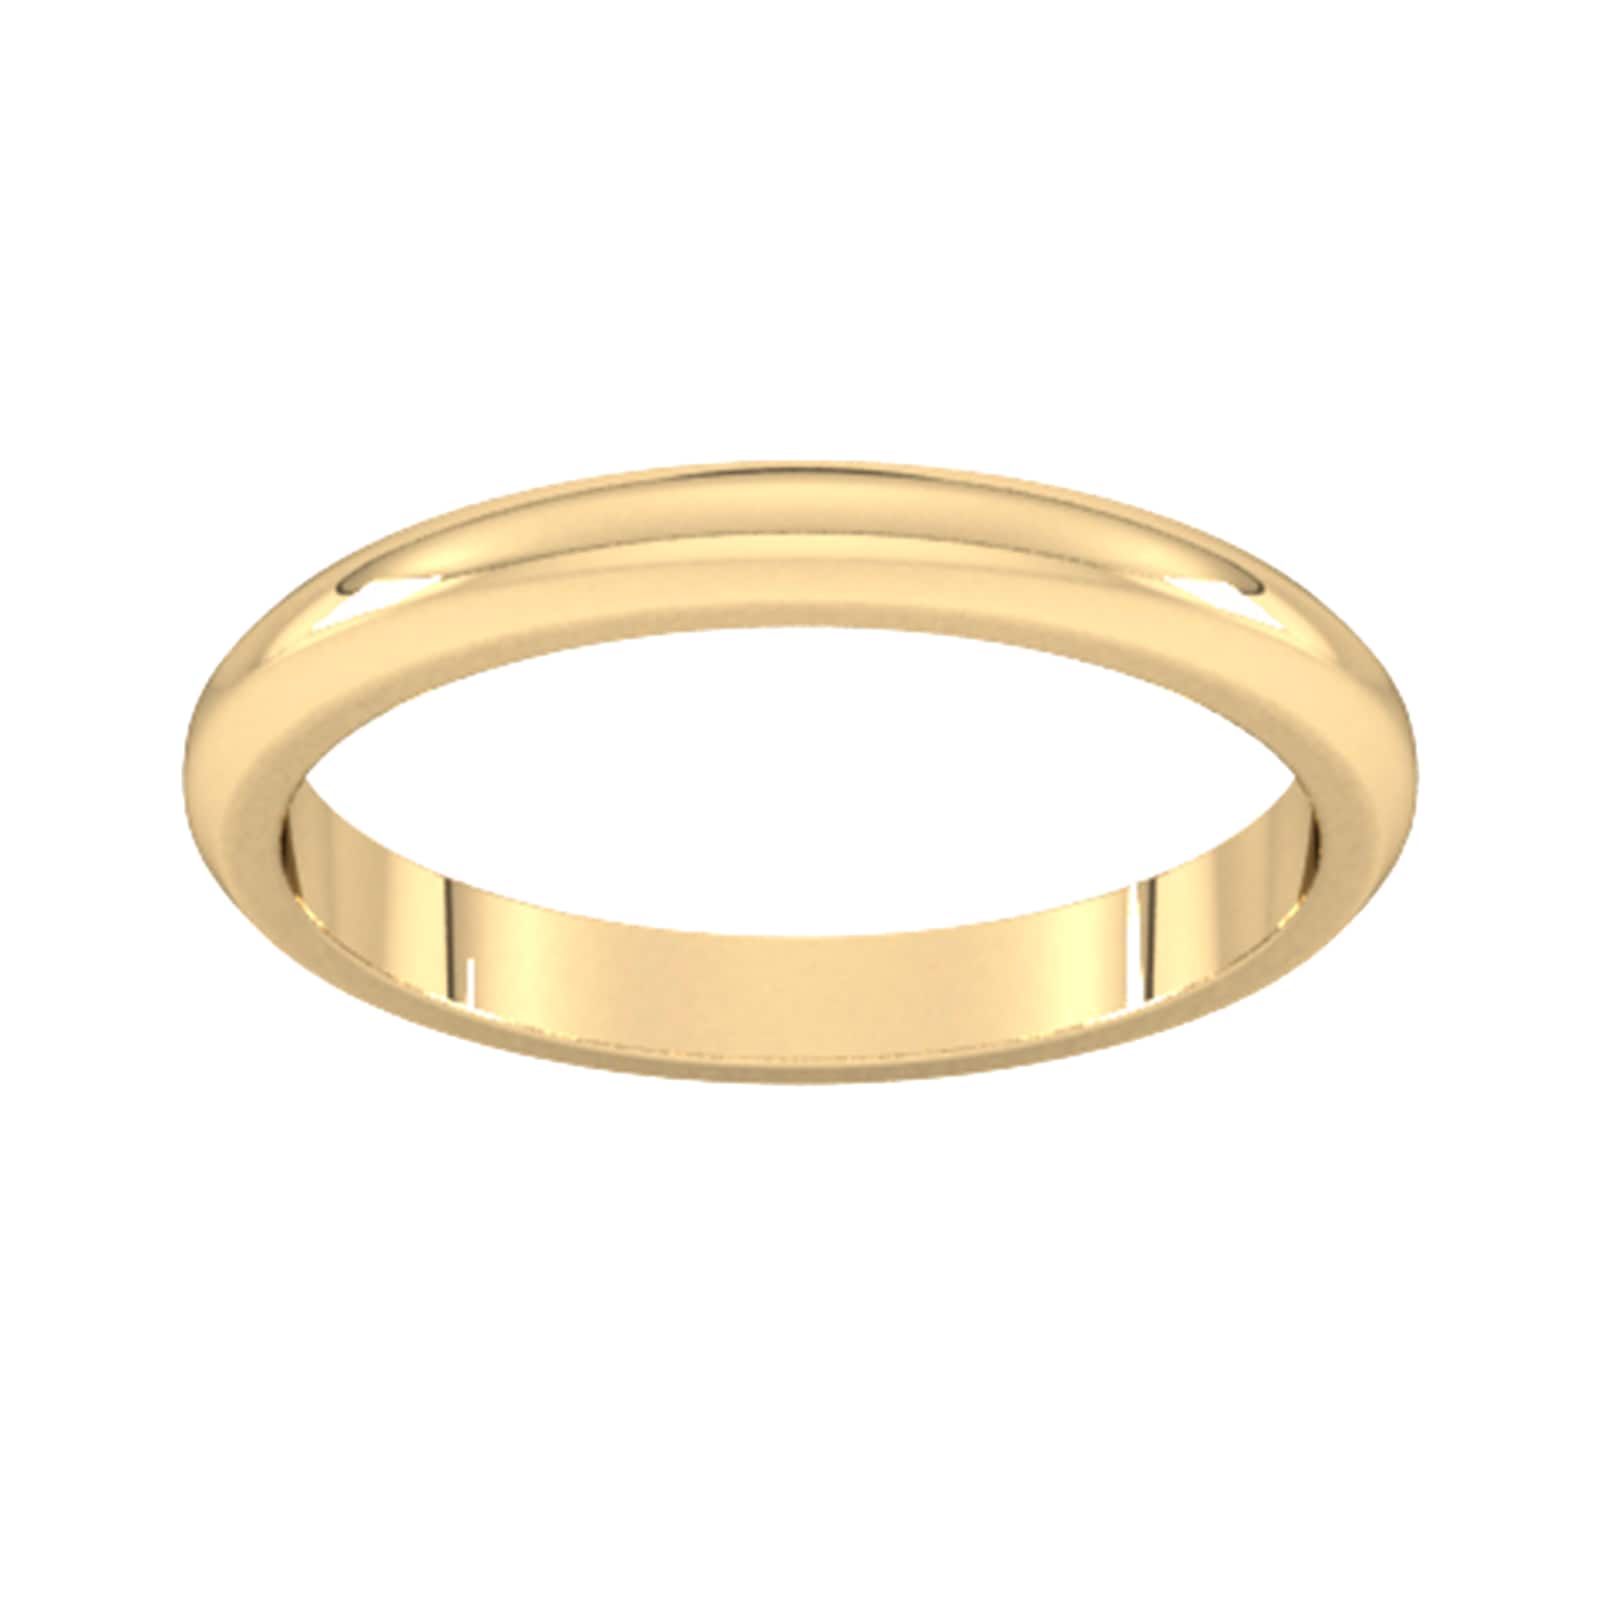 2.5mm D Shape Heavy Wedding Ring In 9 Carat Yellow Gold - Ring Size U